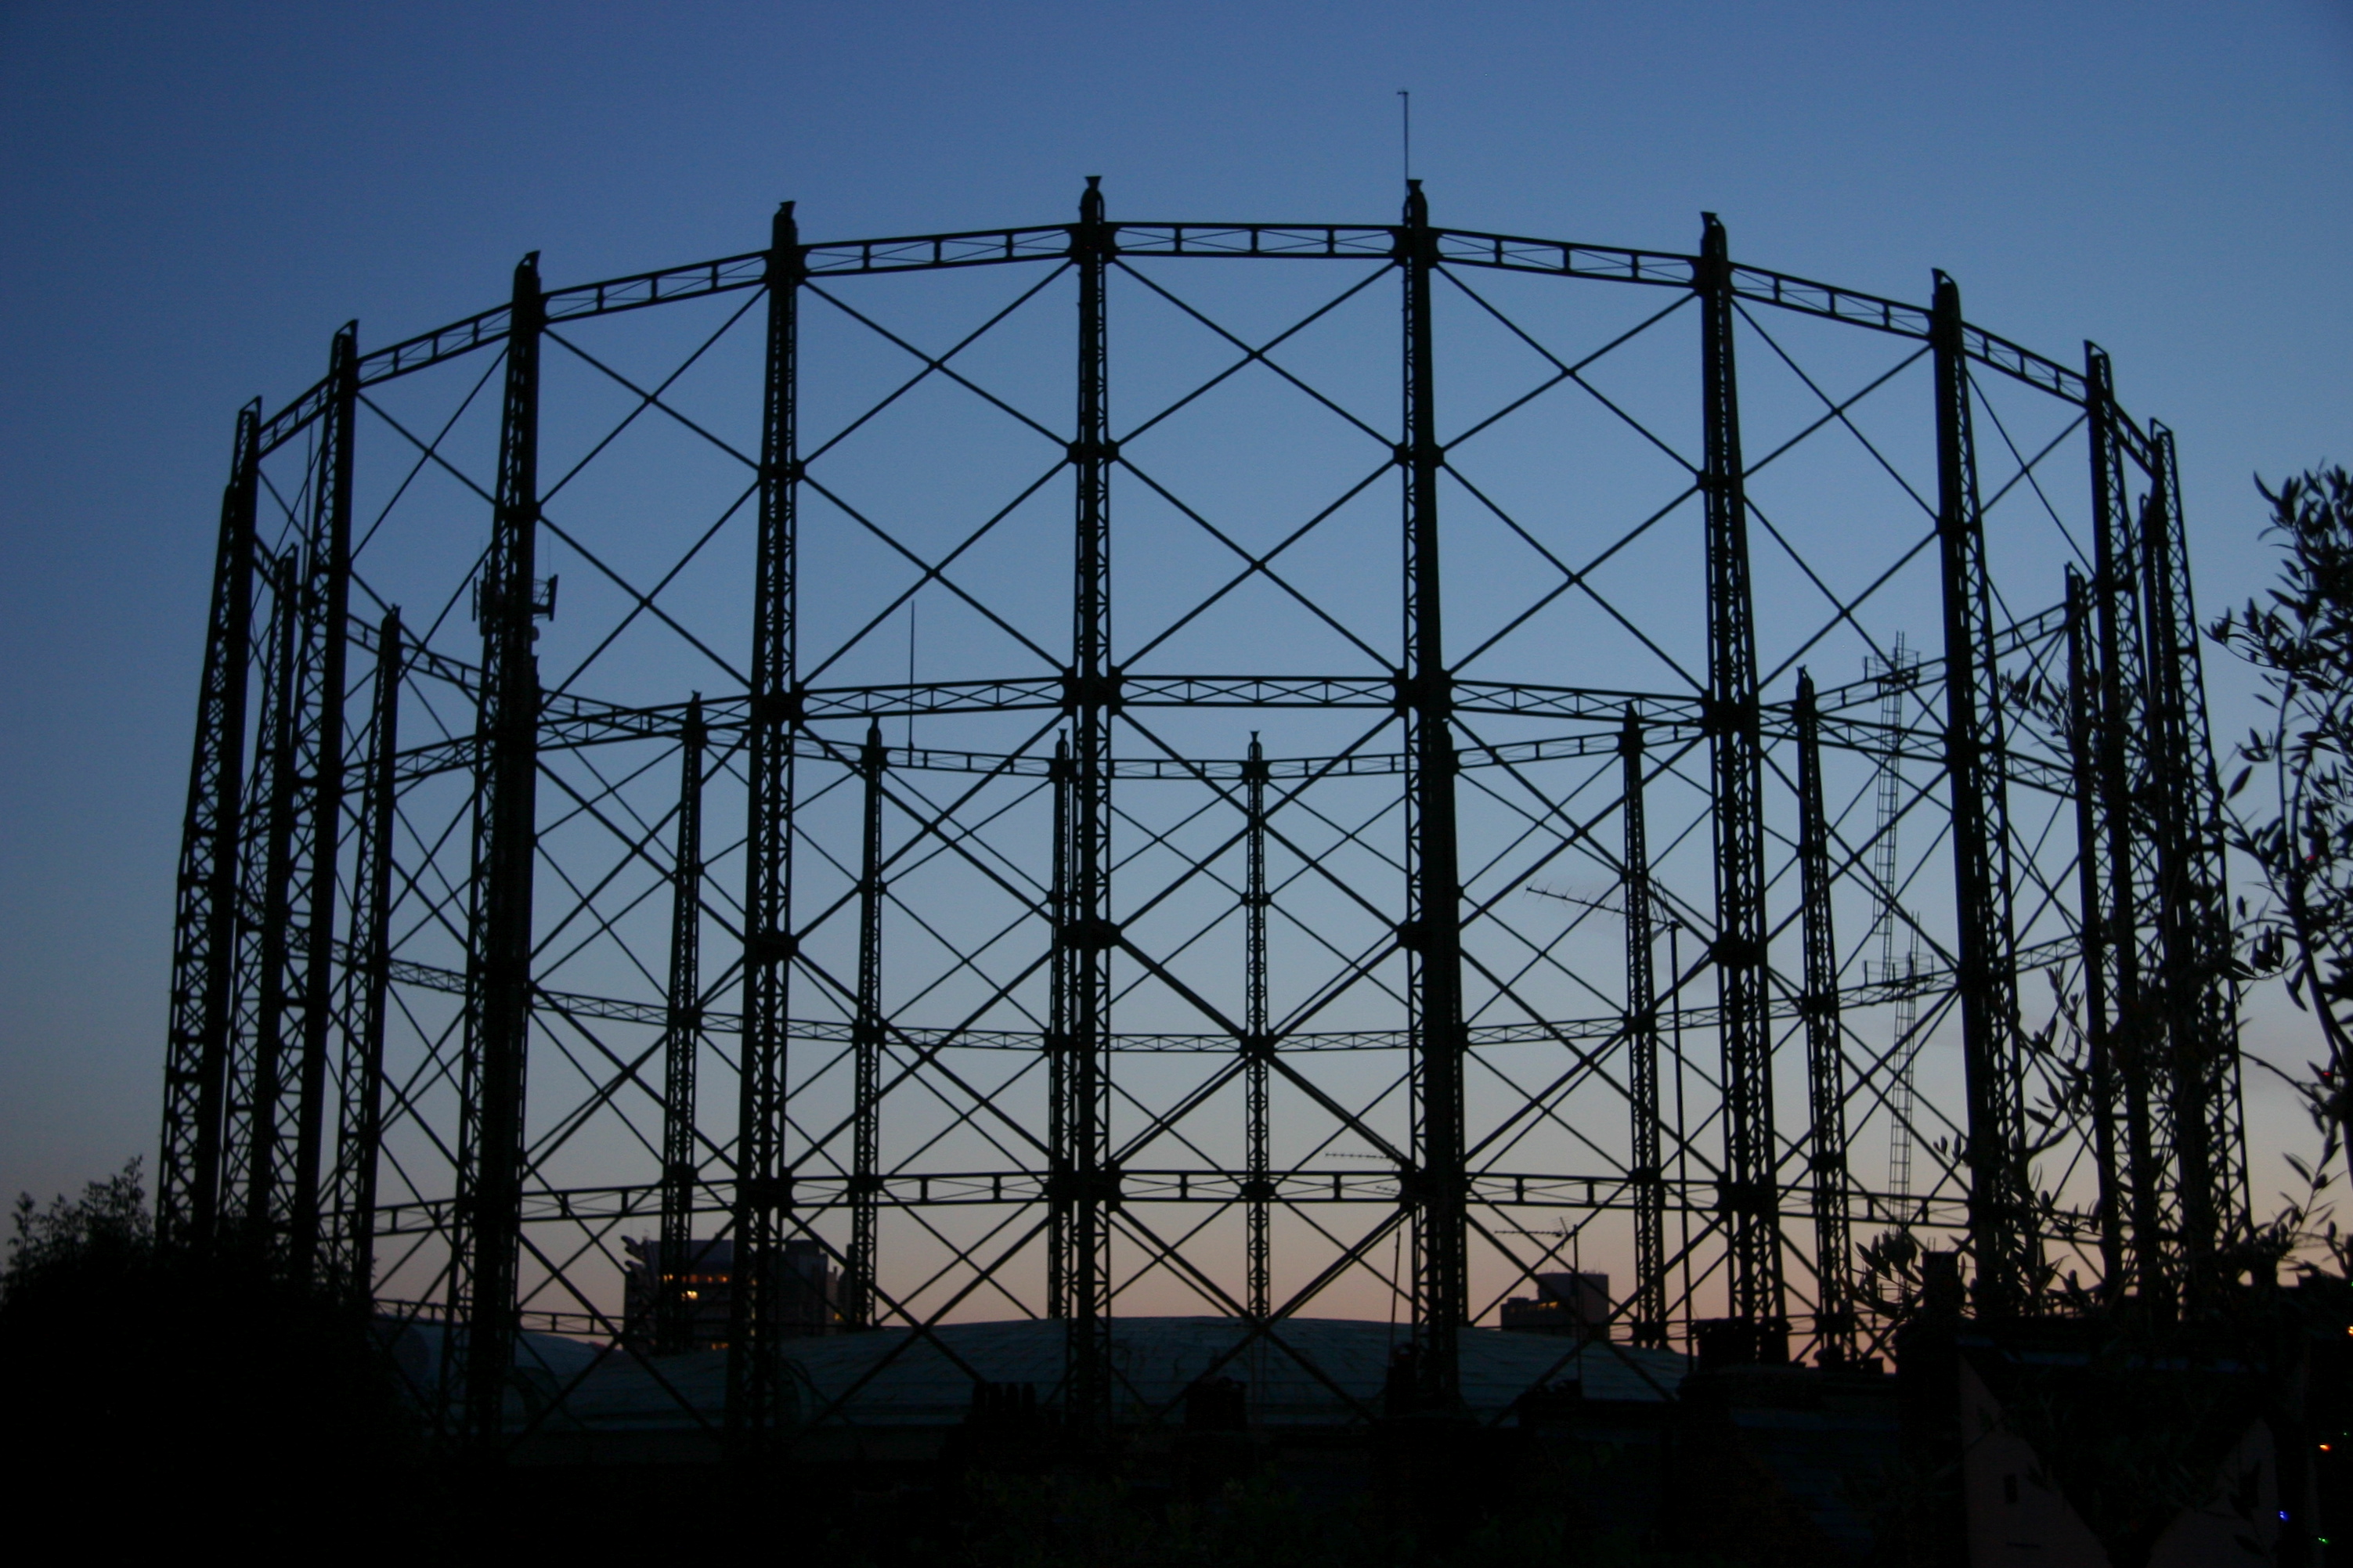 Gasholder at the Oval, London, in black silhouette against the sky at dusk.